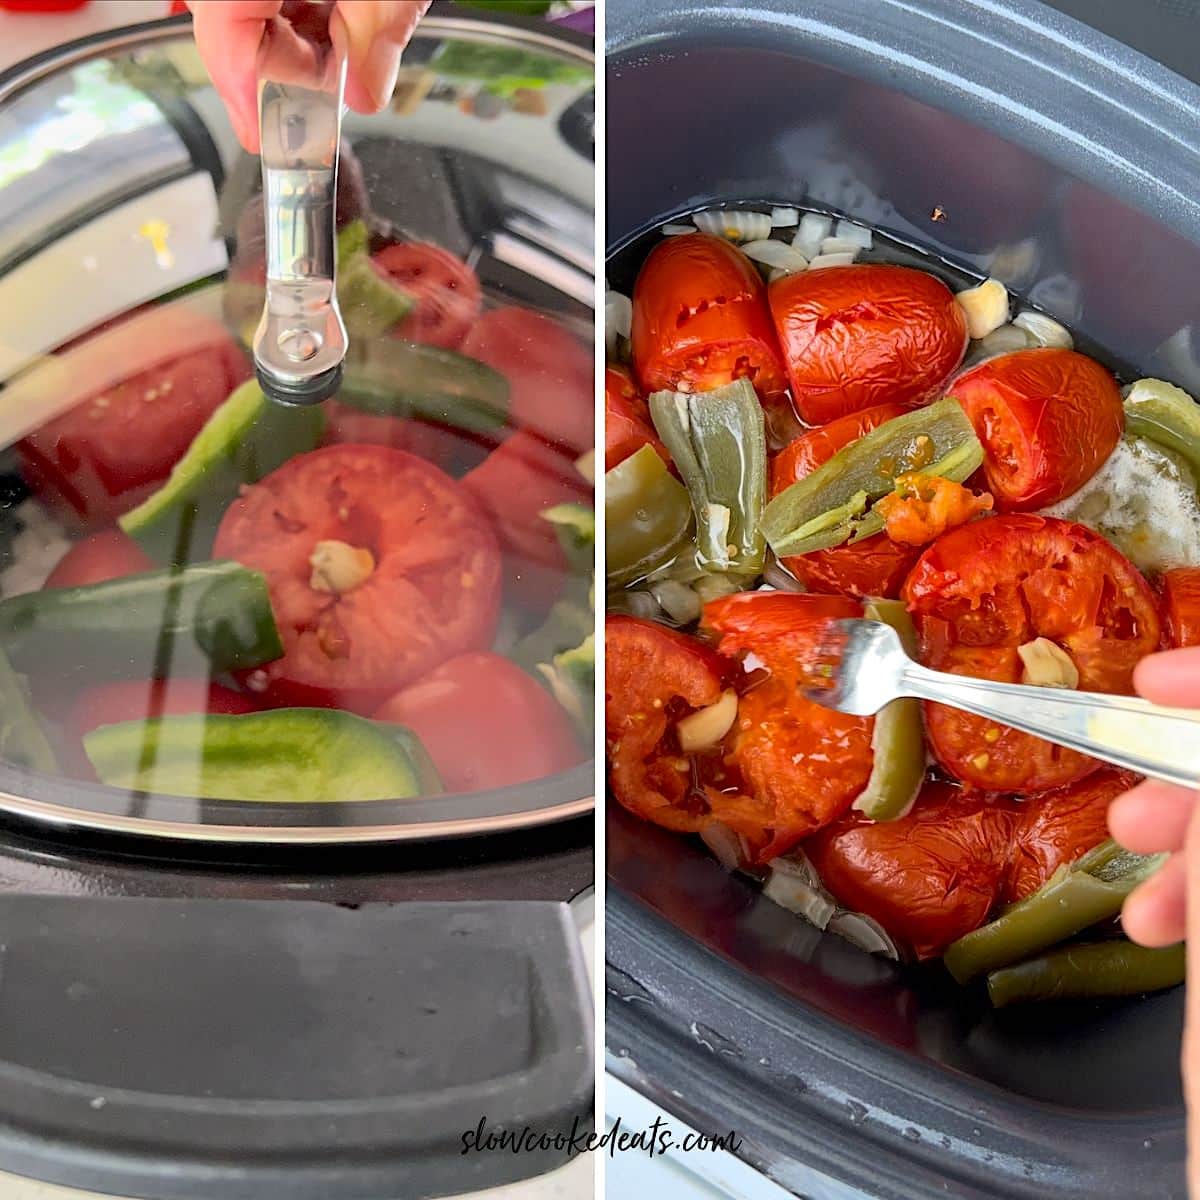 Cover the slow cooker then testing softness of the vegetables with a fork.